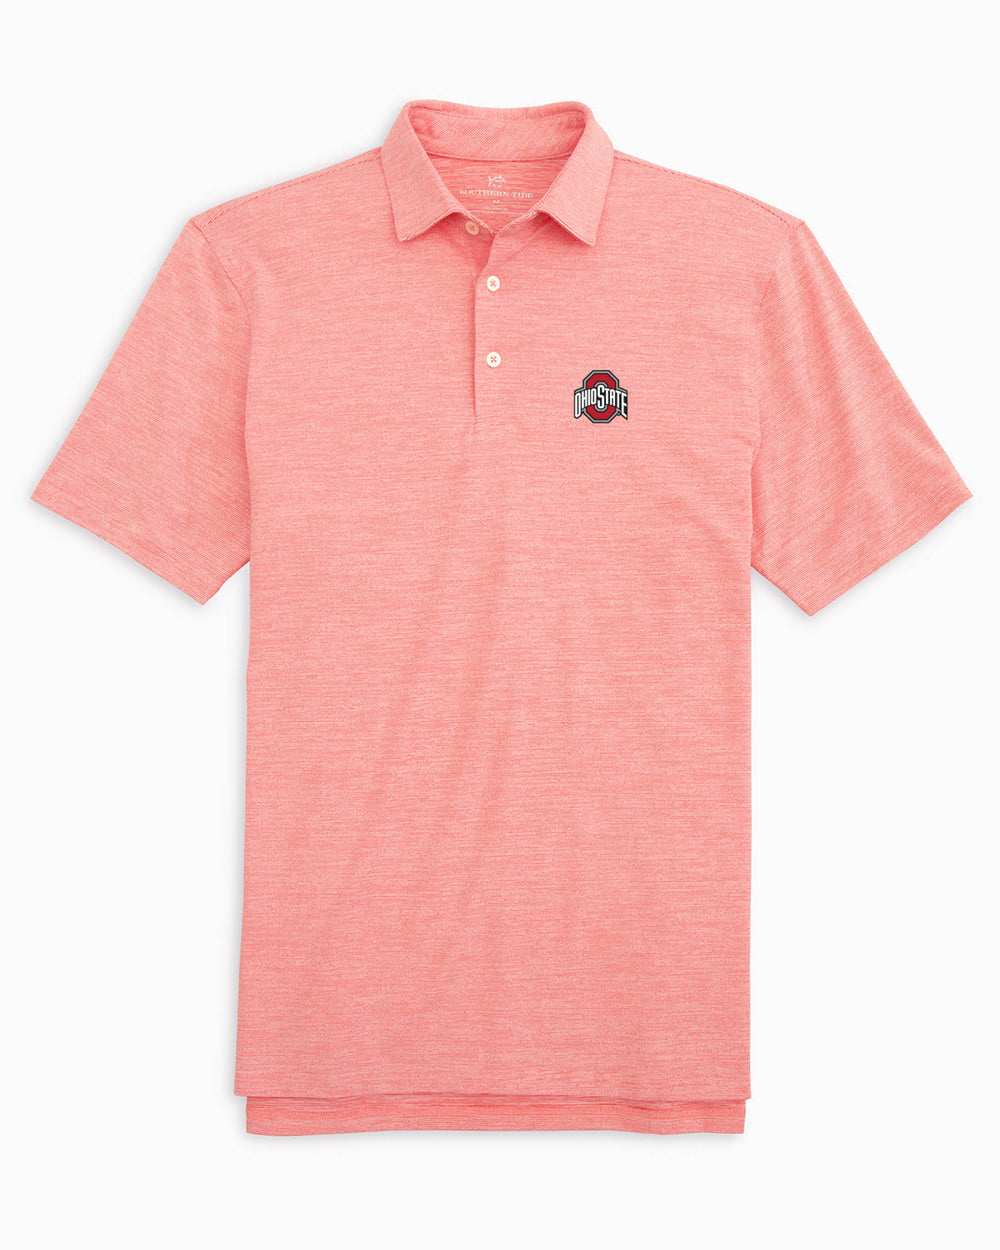 The front of the Ohio State Buckeyes Driver Spacedye Polo Shirt by Southern Tide - Varsity Red